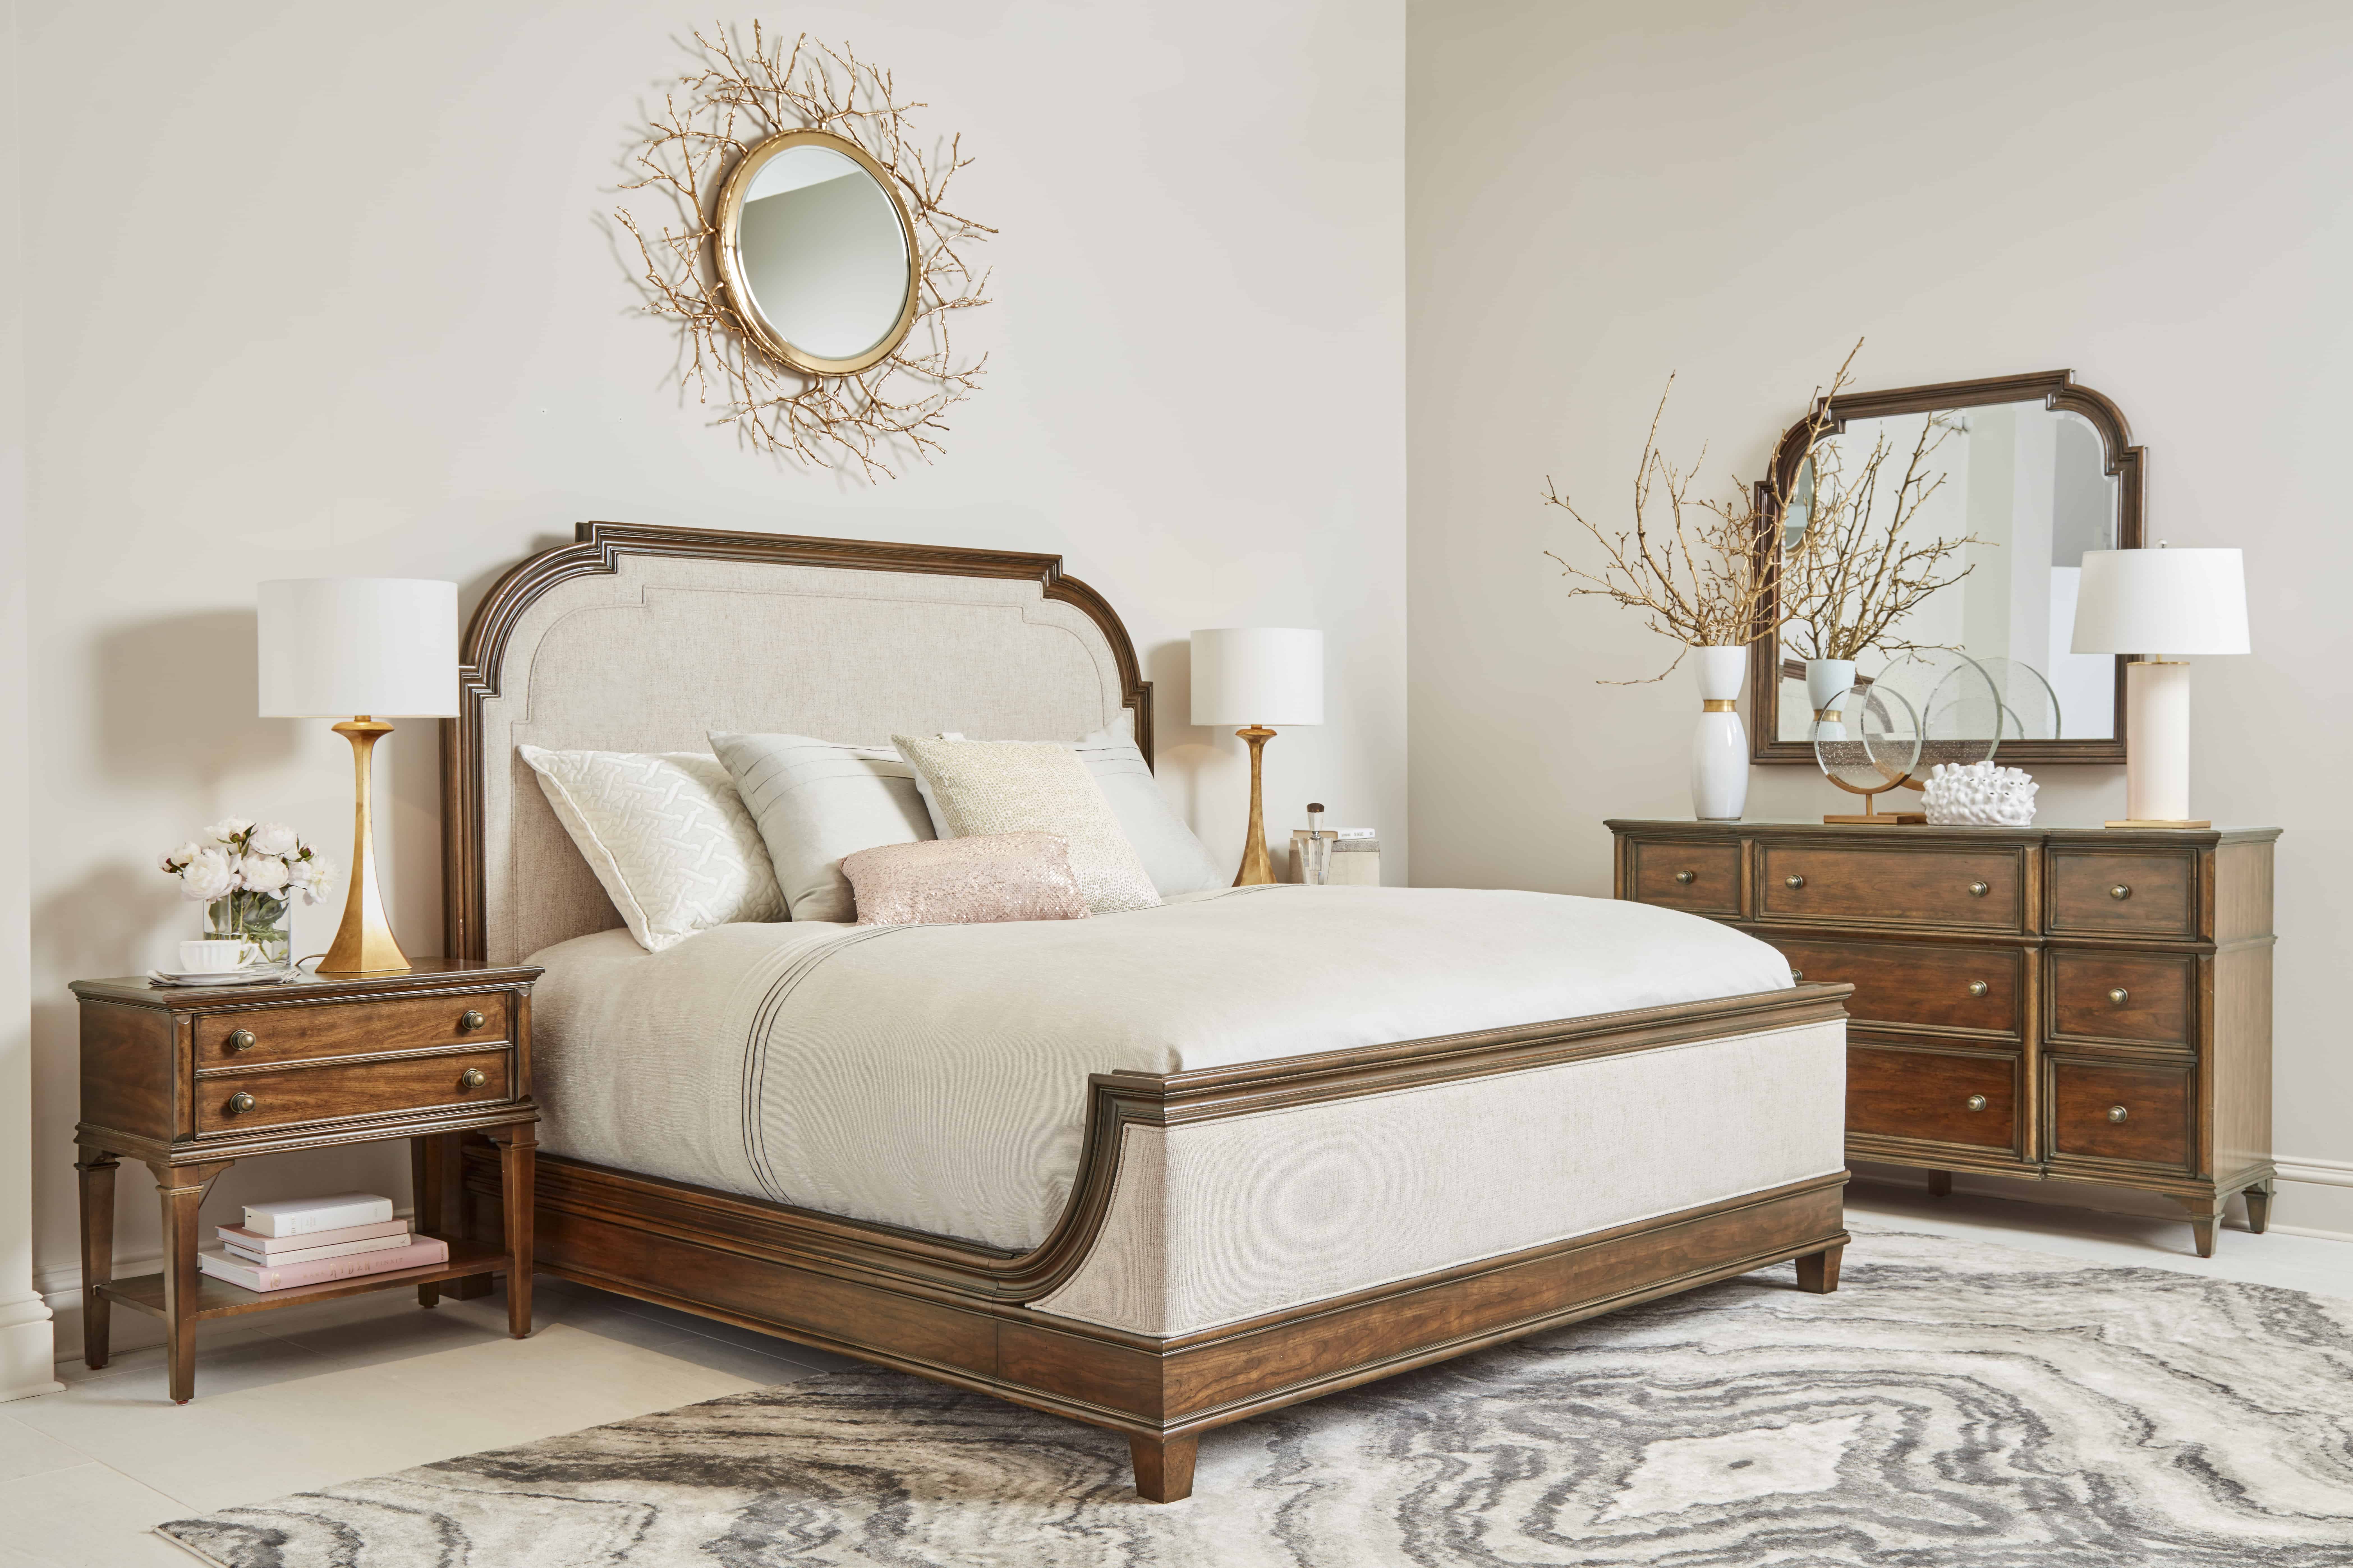 newel bed in room with furniture